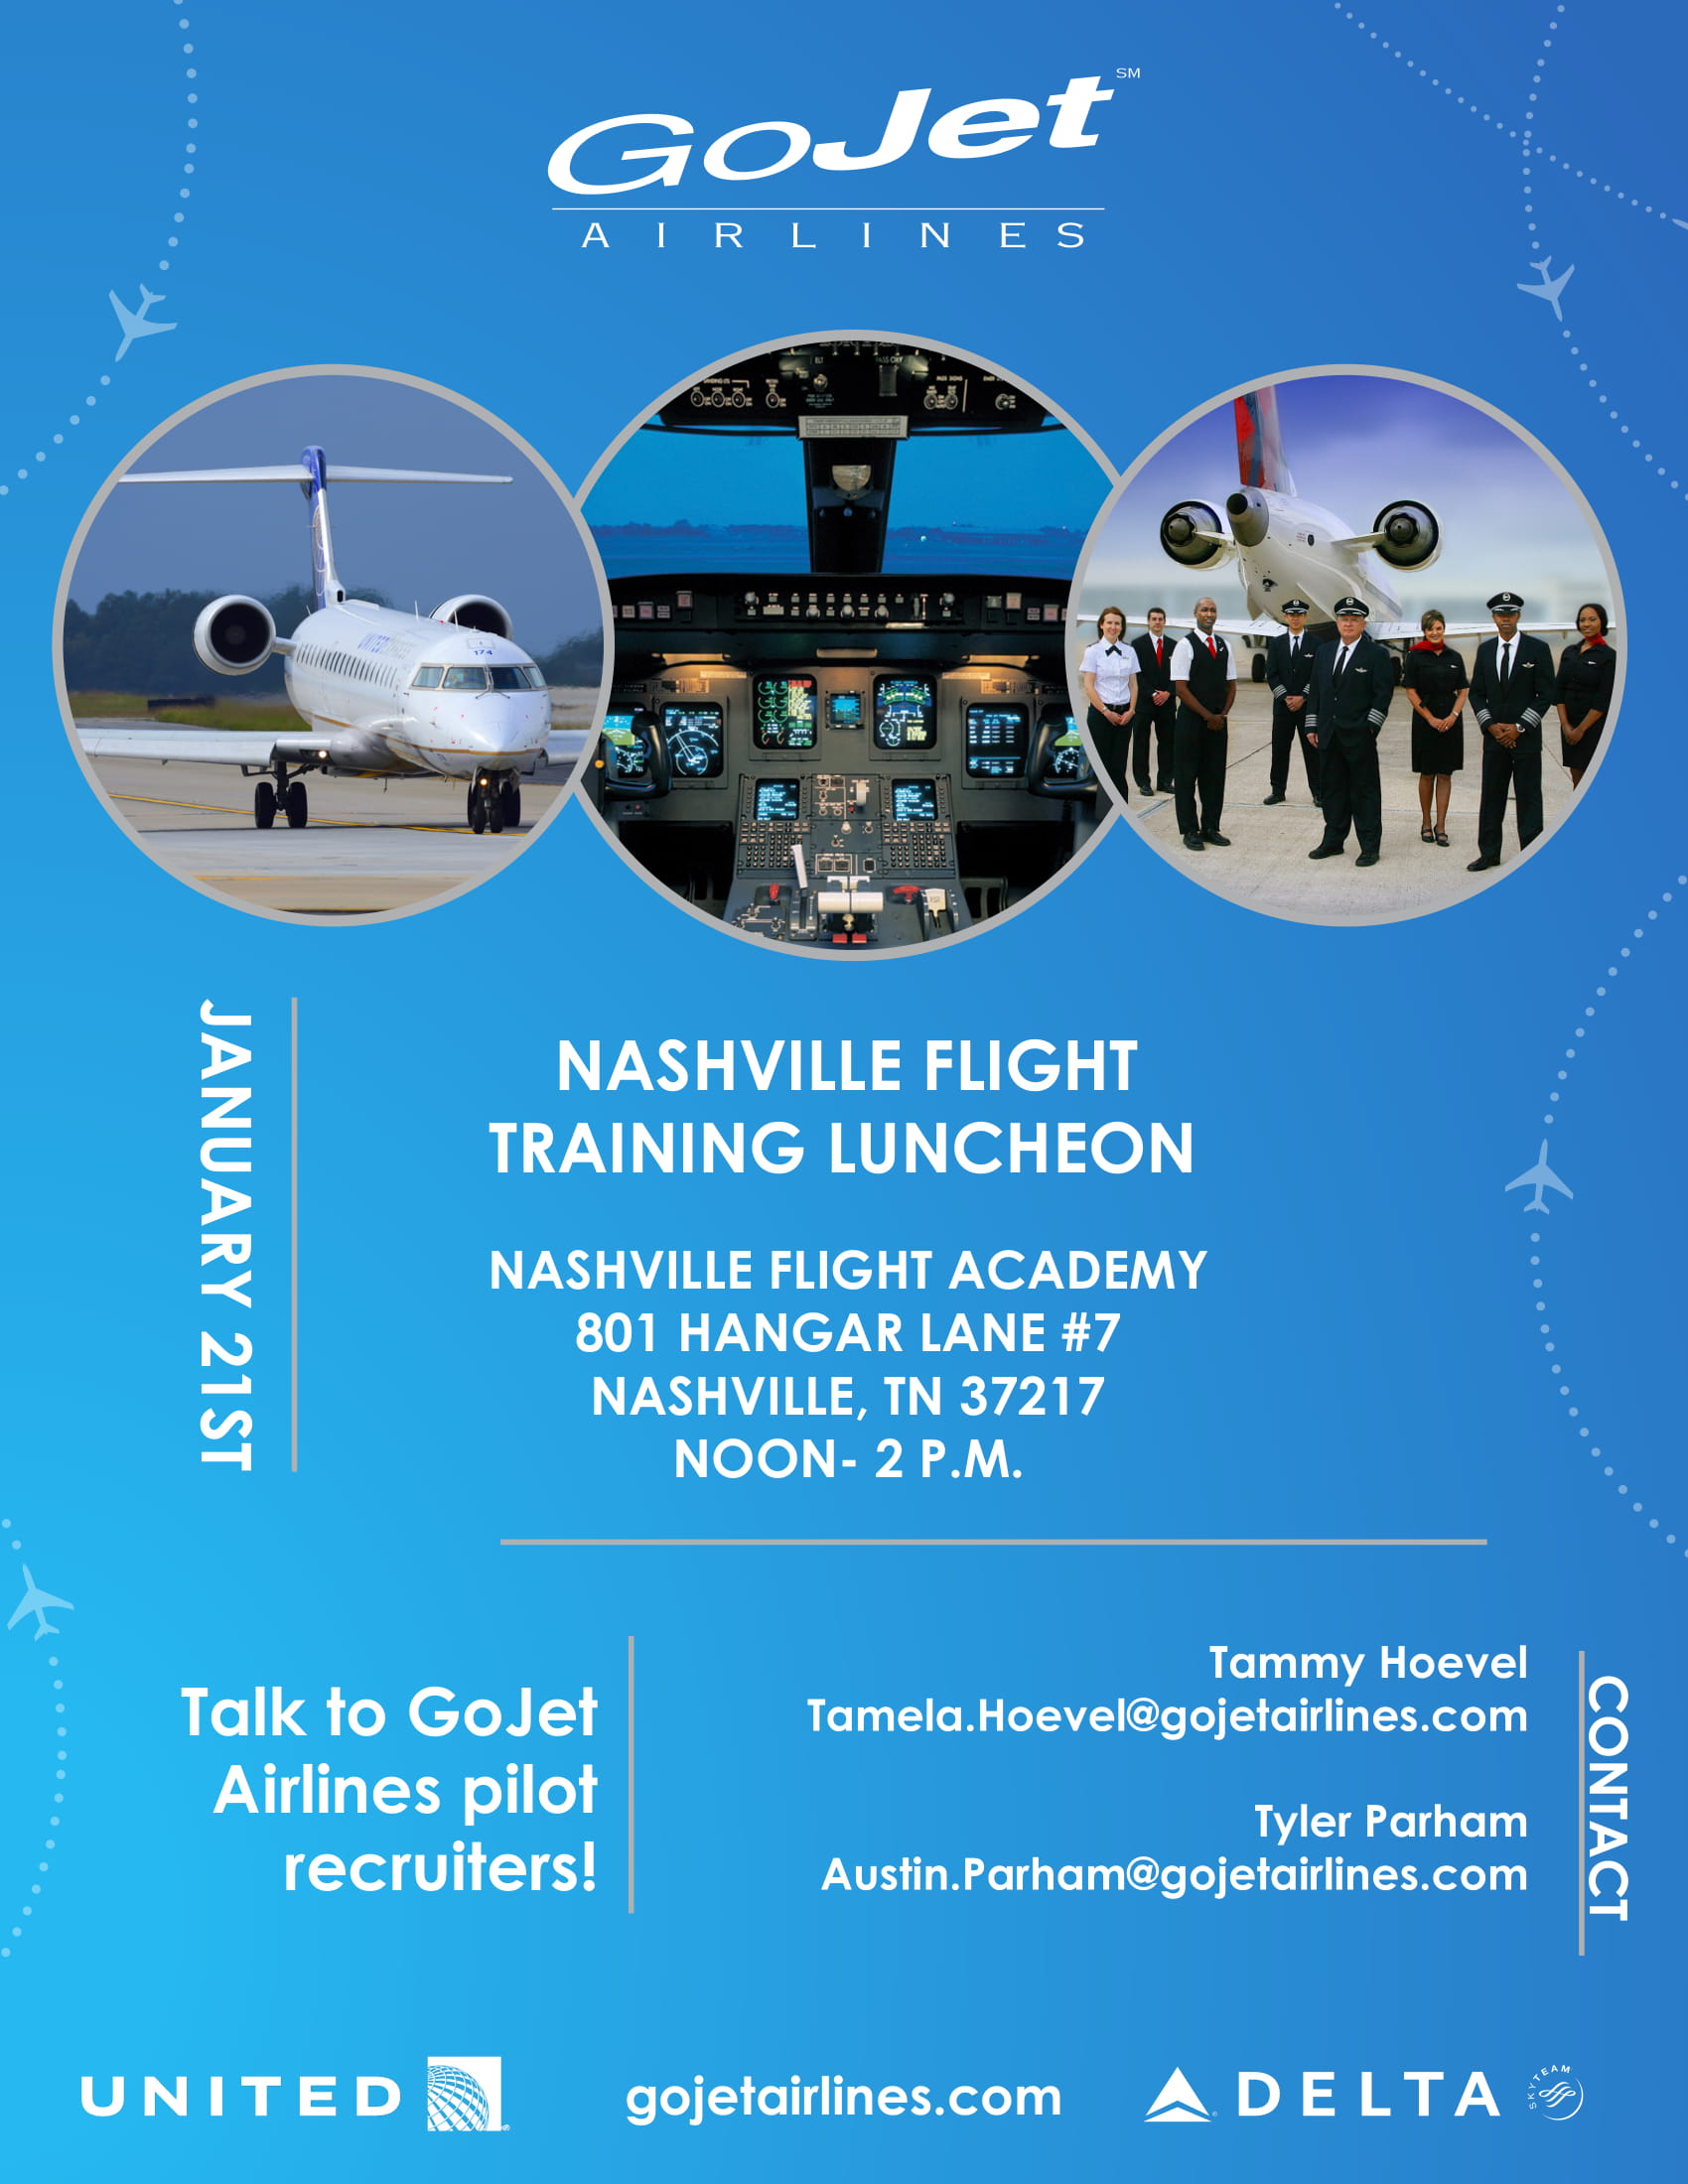 Nashville Flight Training News and Updates - Discover More